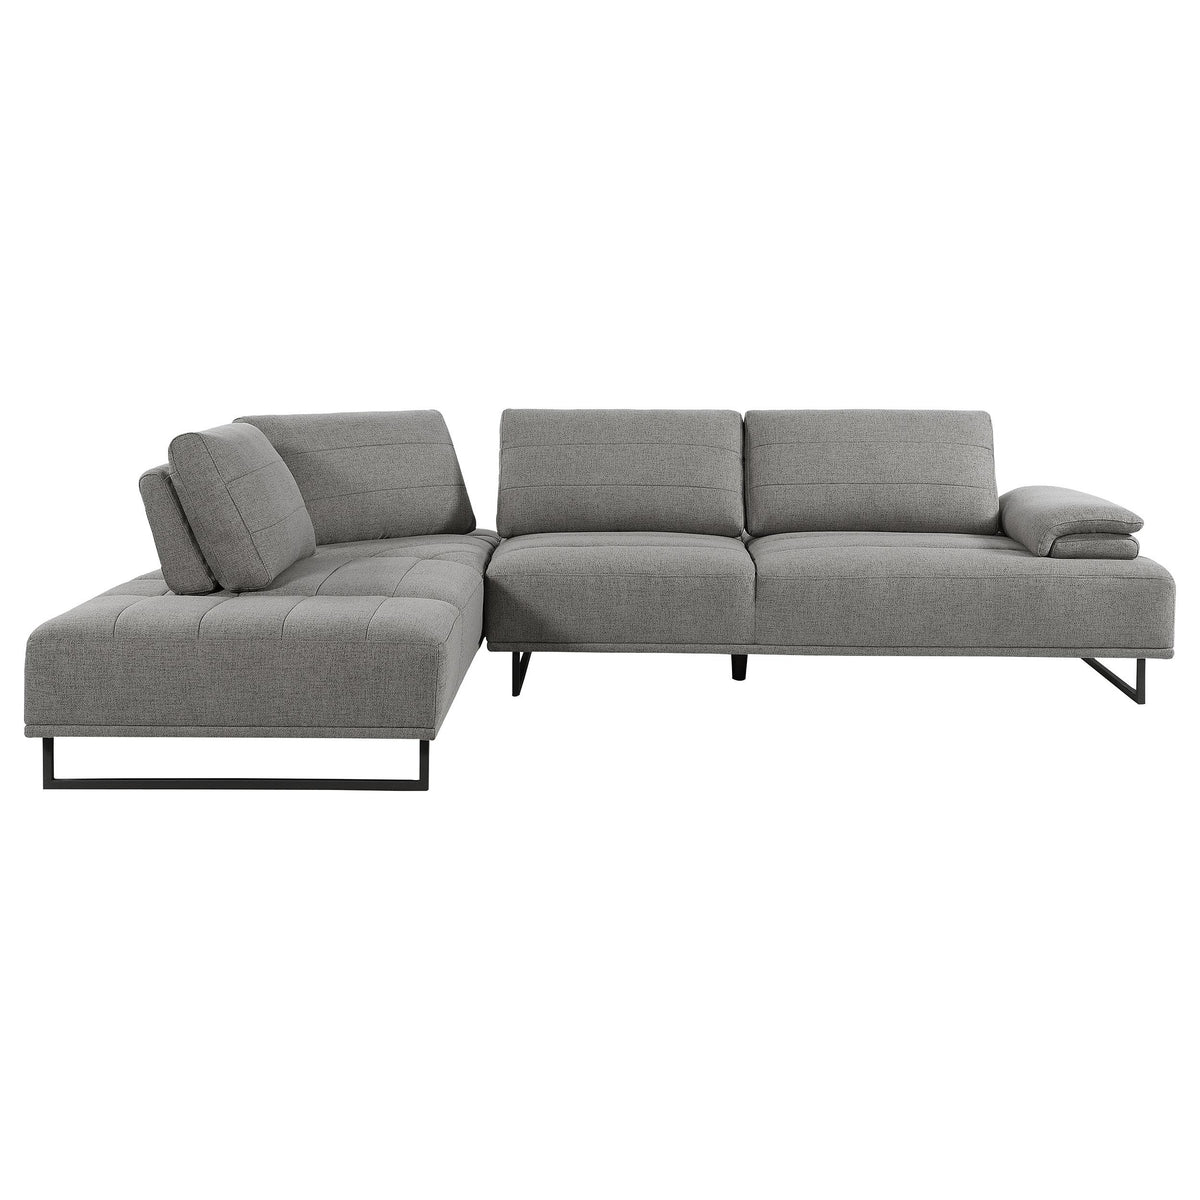 Arden 2-piece Adjustable Back Sectional Taupe Arden 2-piece Adjustable Back Sectional Taupe Half Price Furniture